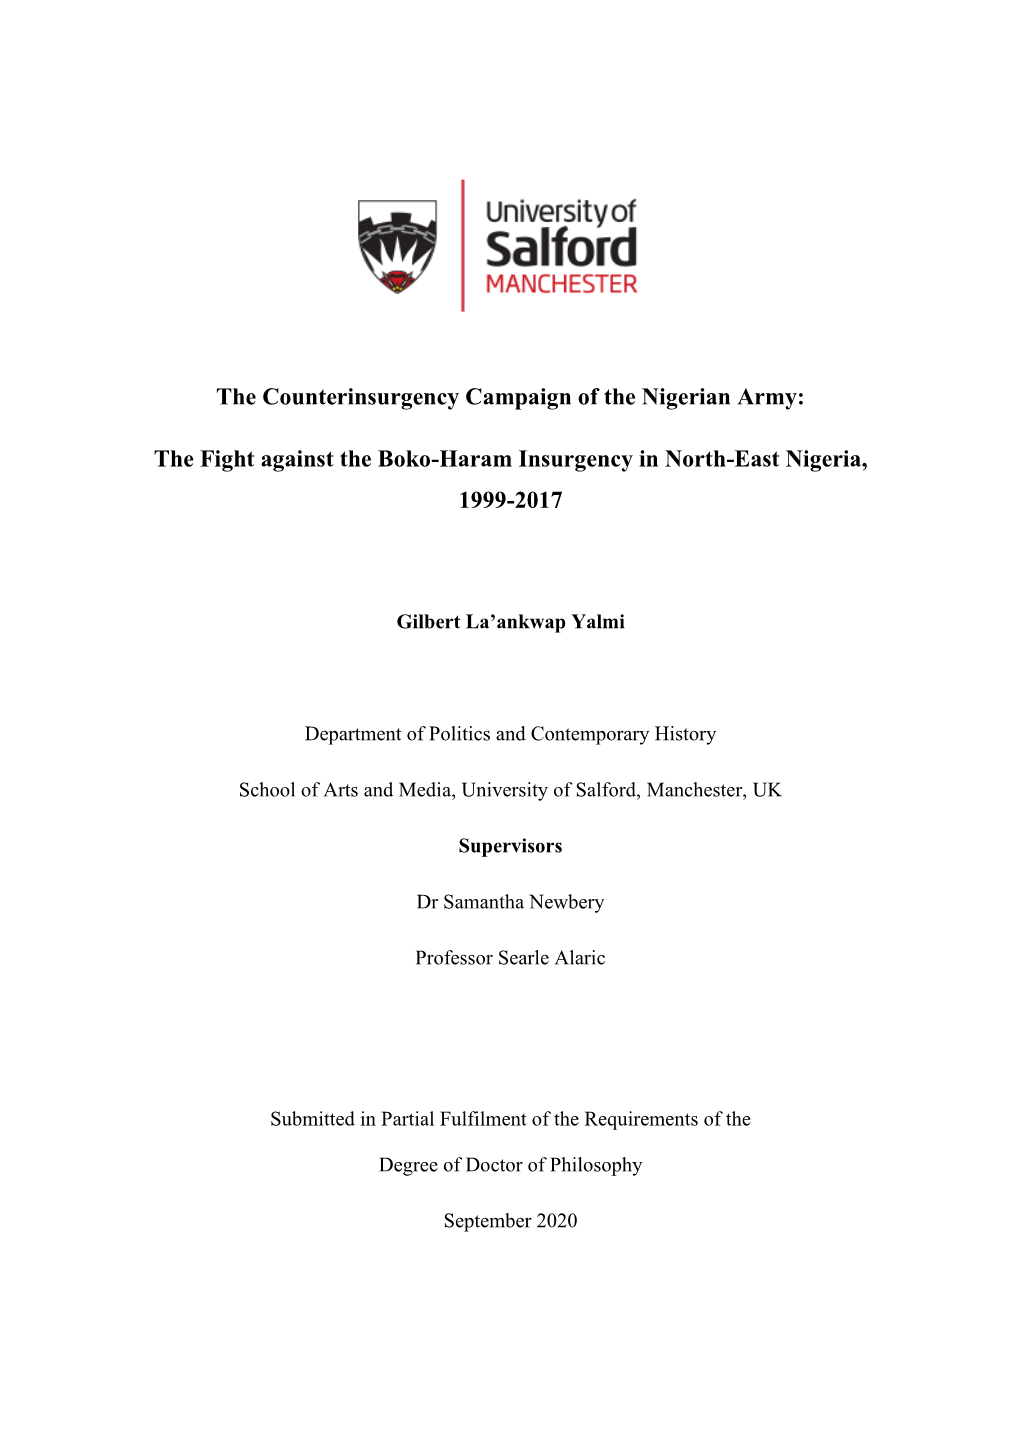 The Counterinsurgency Campaign of the Nigerian Army: the Fight